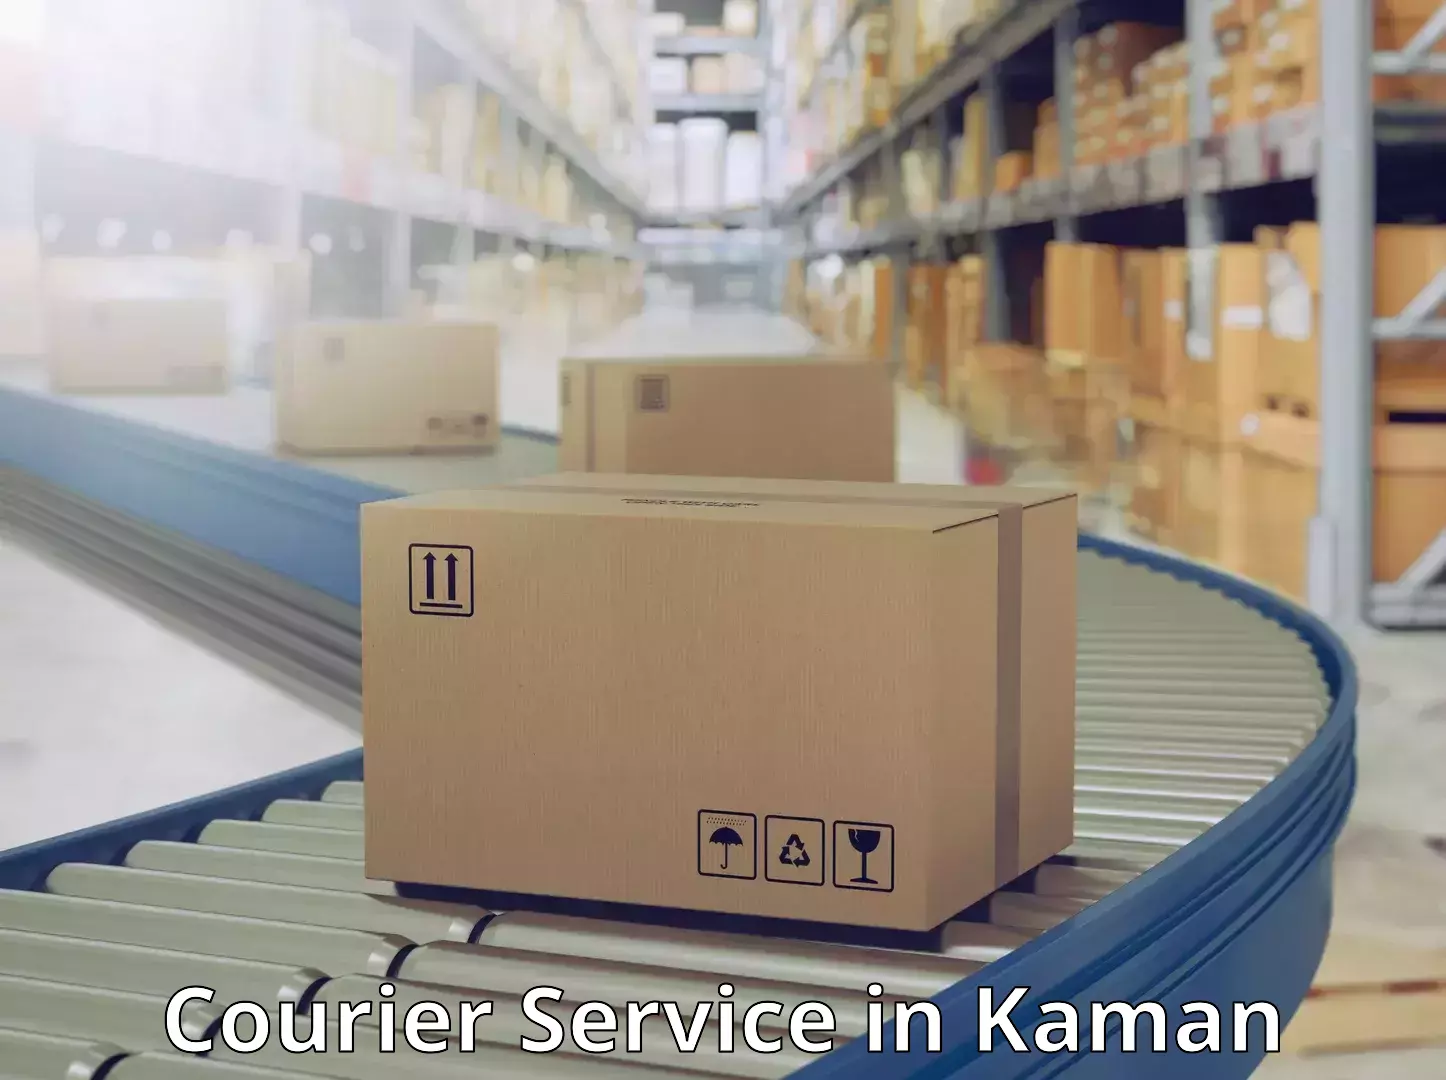 Reliable logistics providers in Kaman